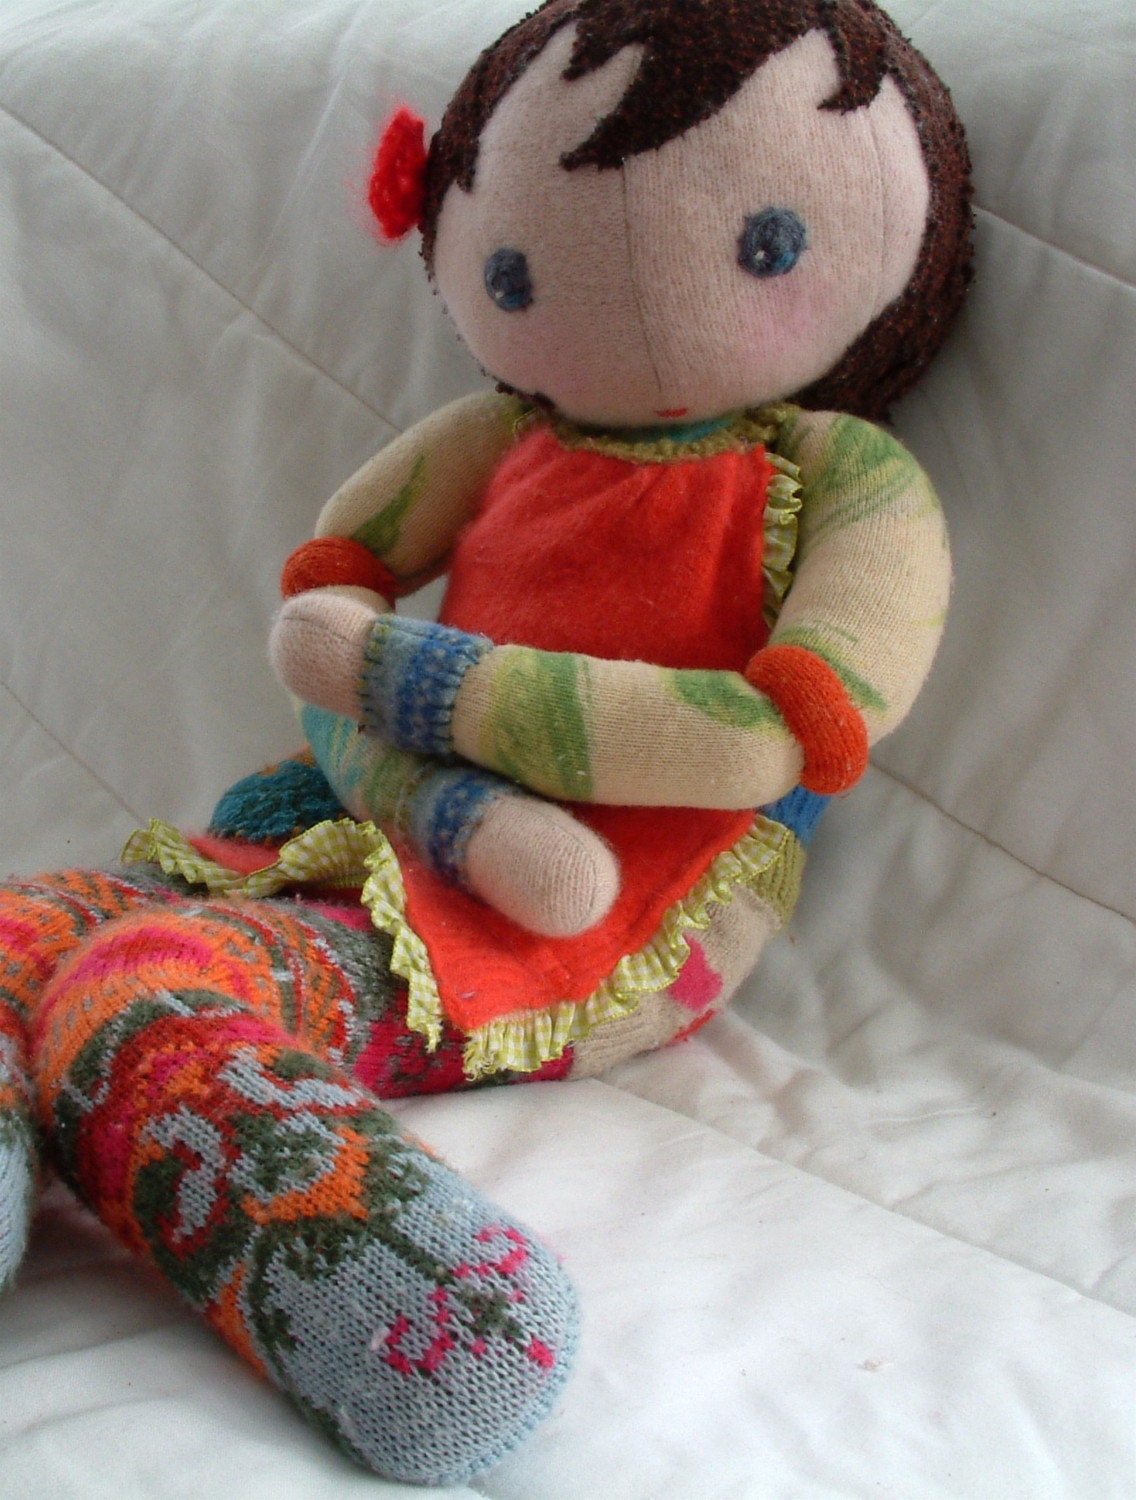 waldorf doll felted recycled sweaters stuffed with wool-taking custom orders